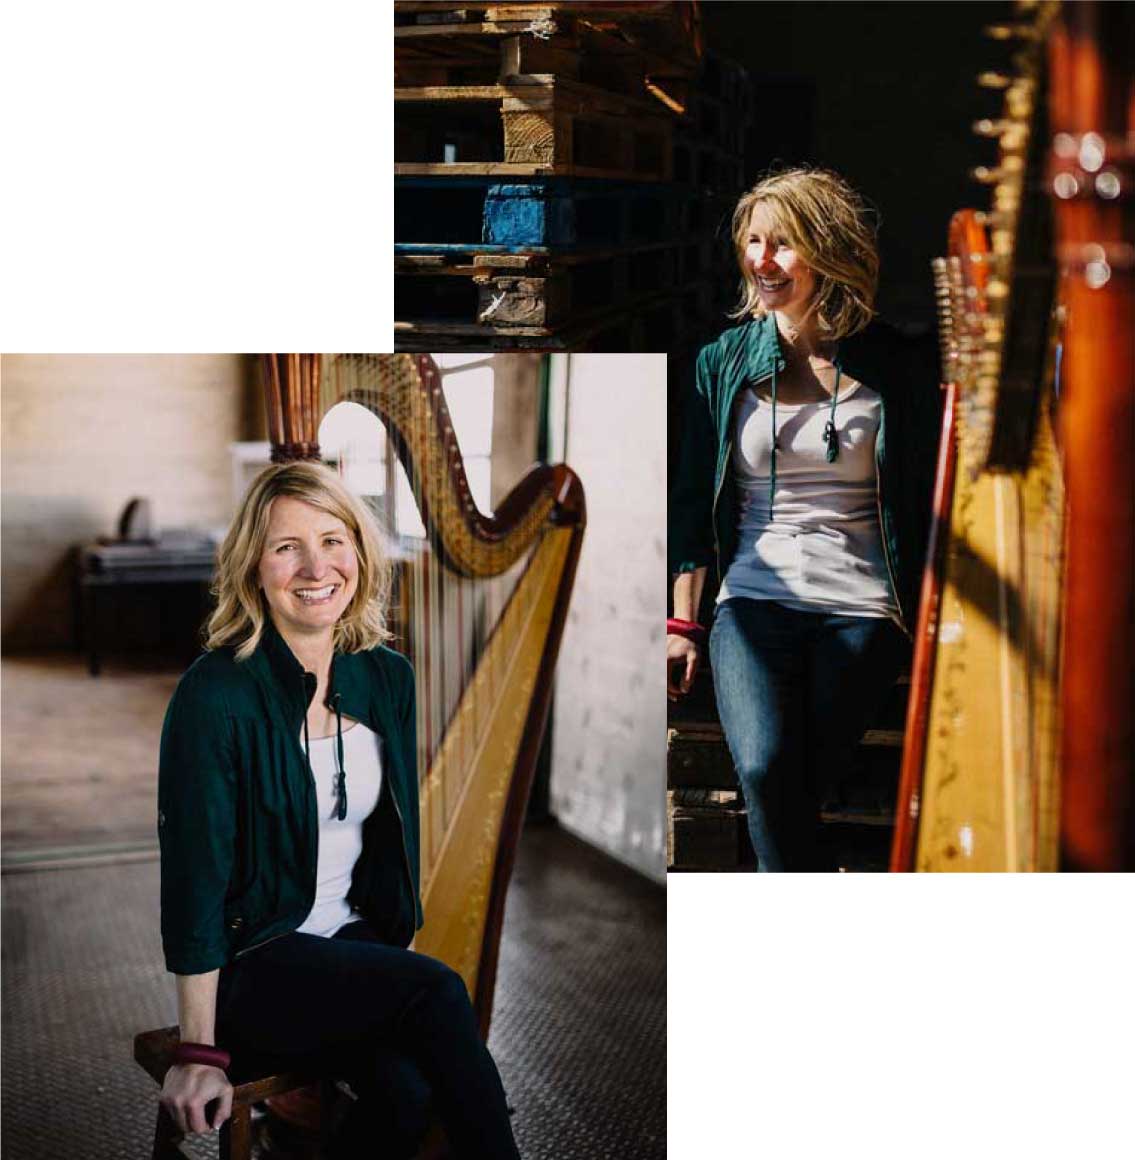 Leigh Brown is a harpist in Portland Oregon and enjoys drumming as well as winemaking